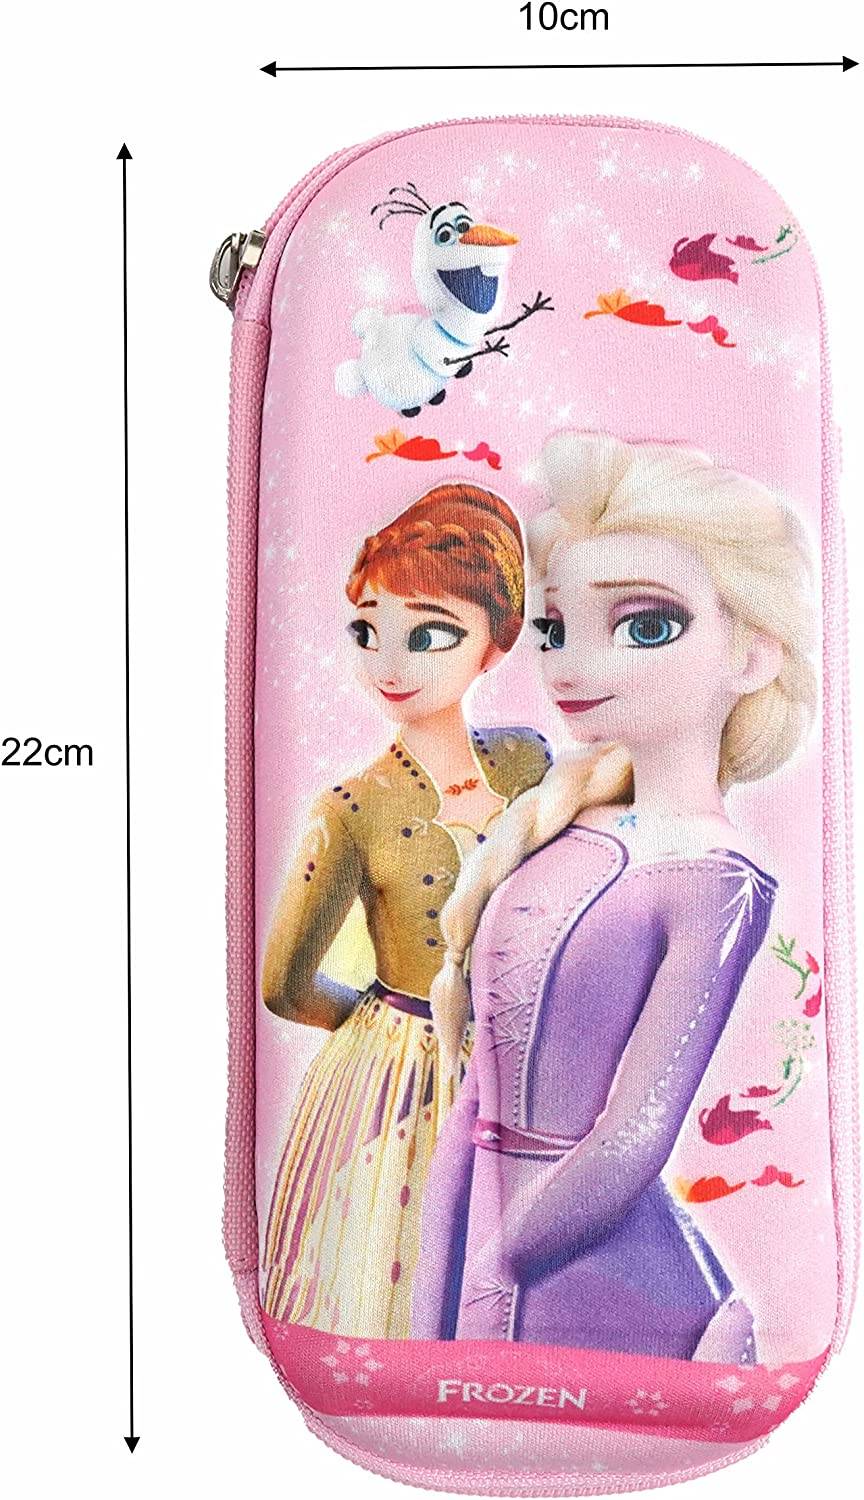 3D EVA Embossed Pencil Case for Girls - Pencil Pouch , New Kids